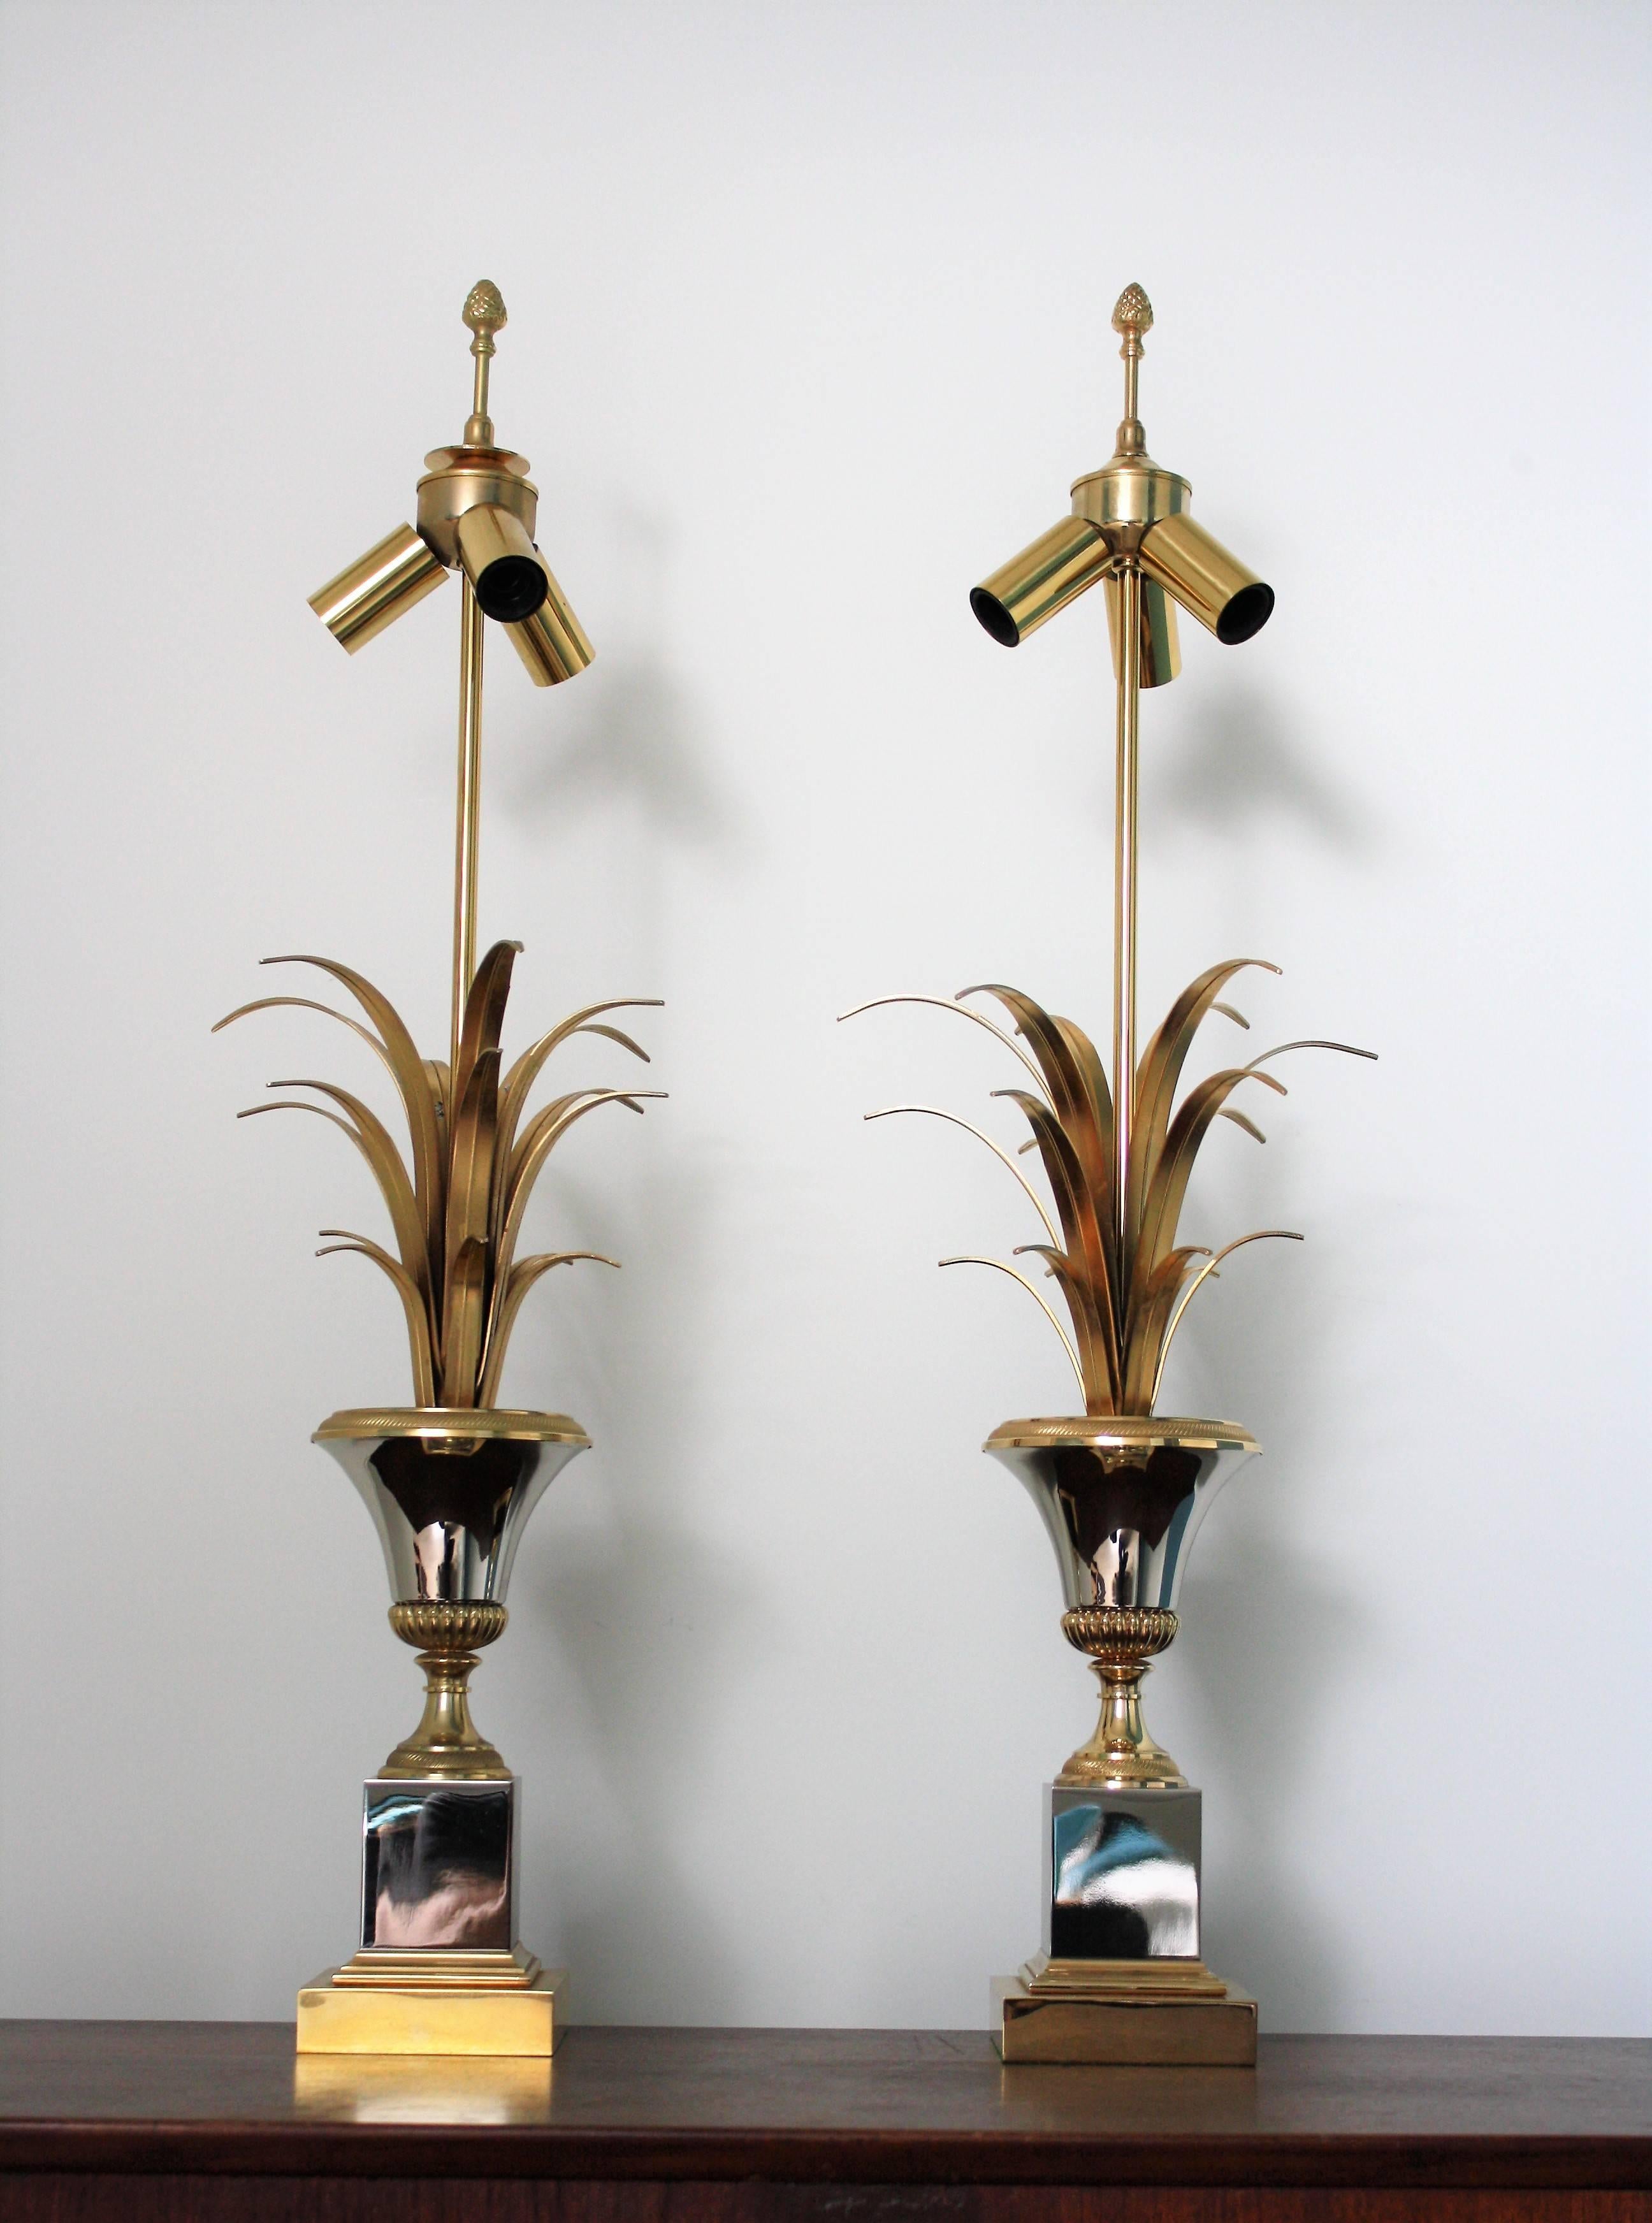 Patinated brass pineapple leaf table lamps attributed to Maison Charles.
This Regency style lamps are also known as 'lampe vase' and is an attractive design from the 1960s.
The three lightpoint lamps are made from chrome and brass which shows